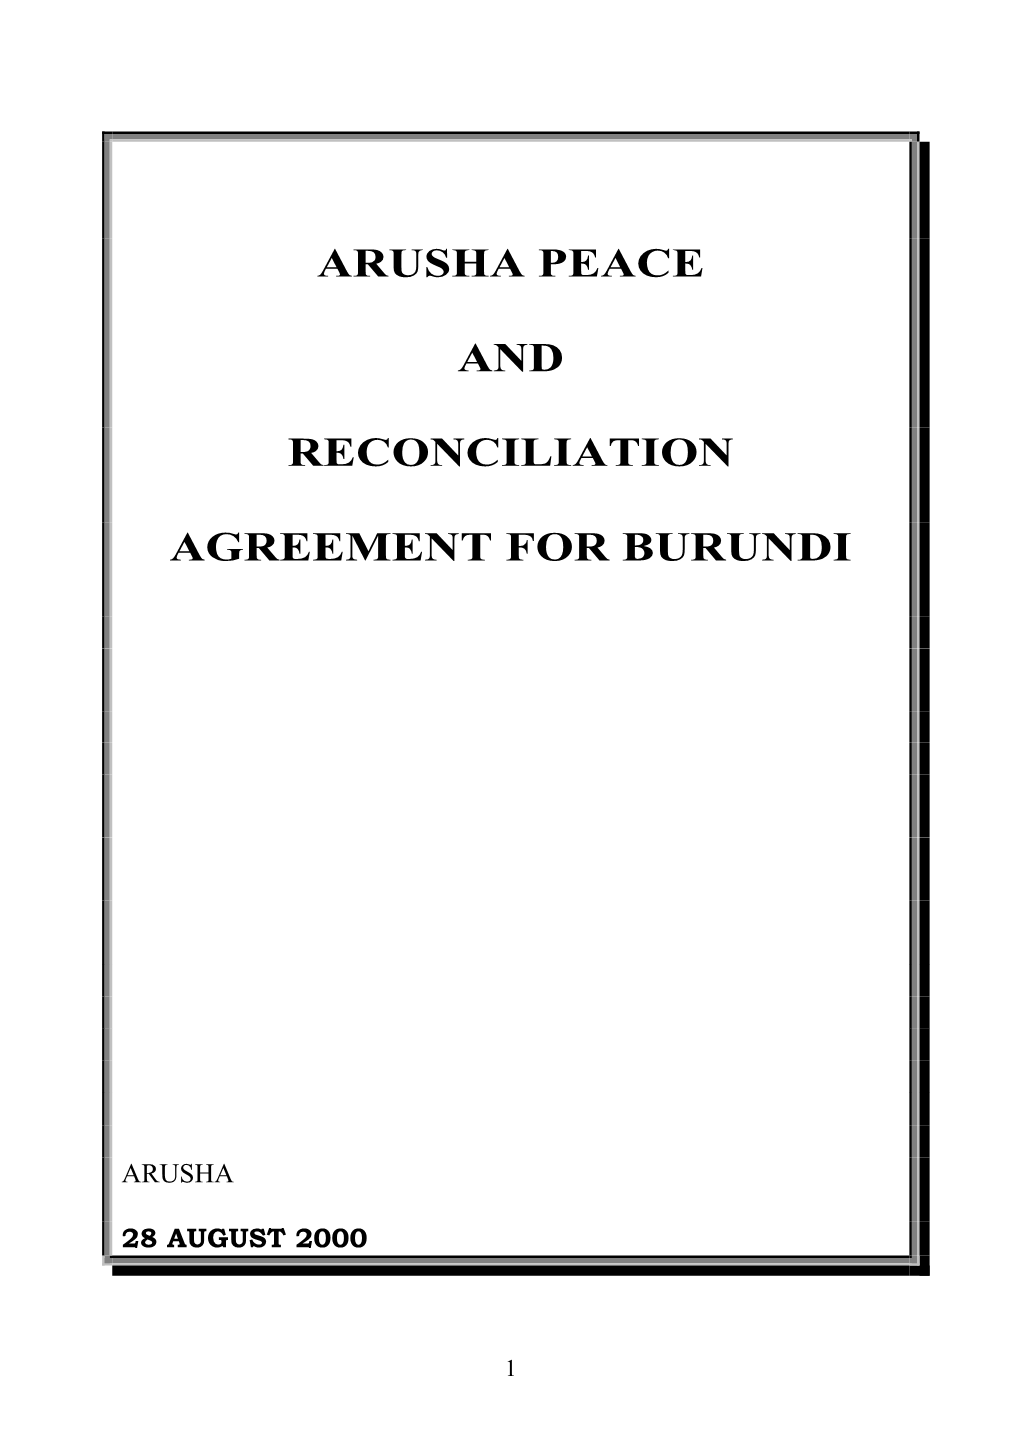 Arusha Peace and Reconciliation Agreement for Burundi